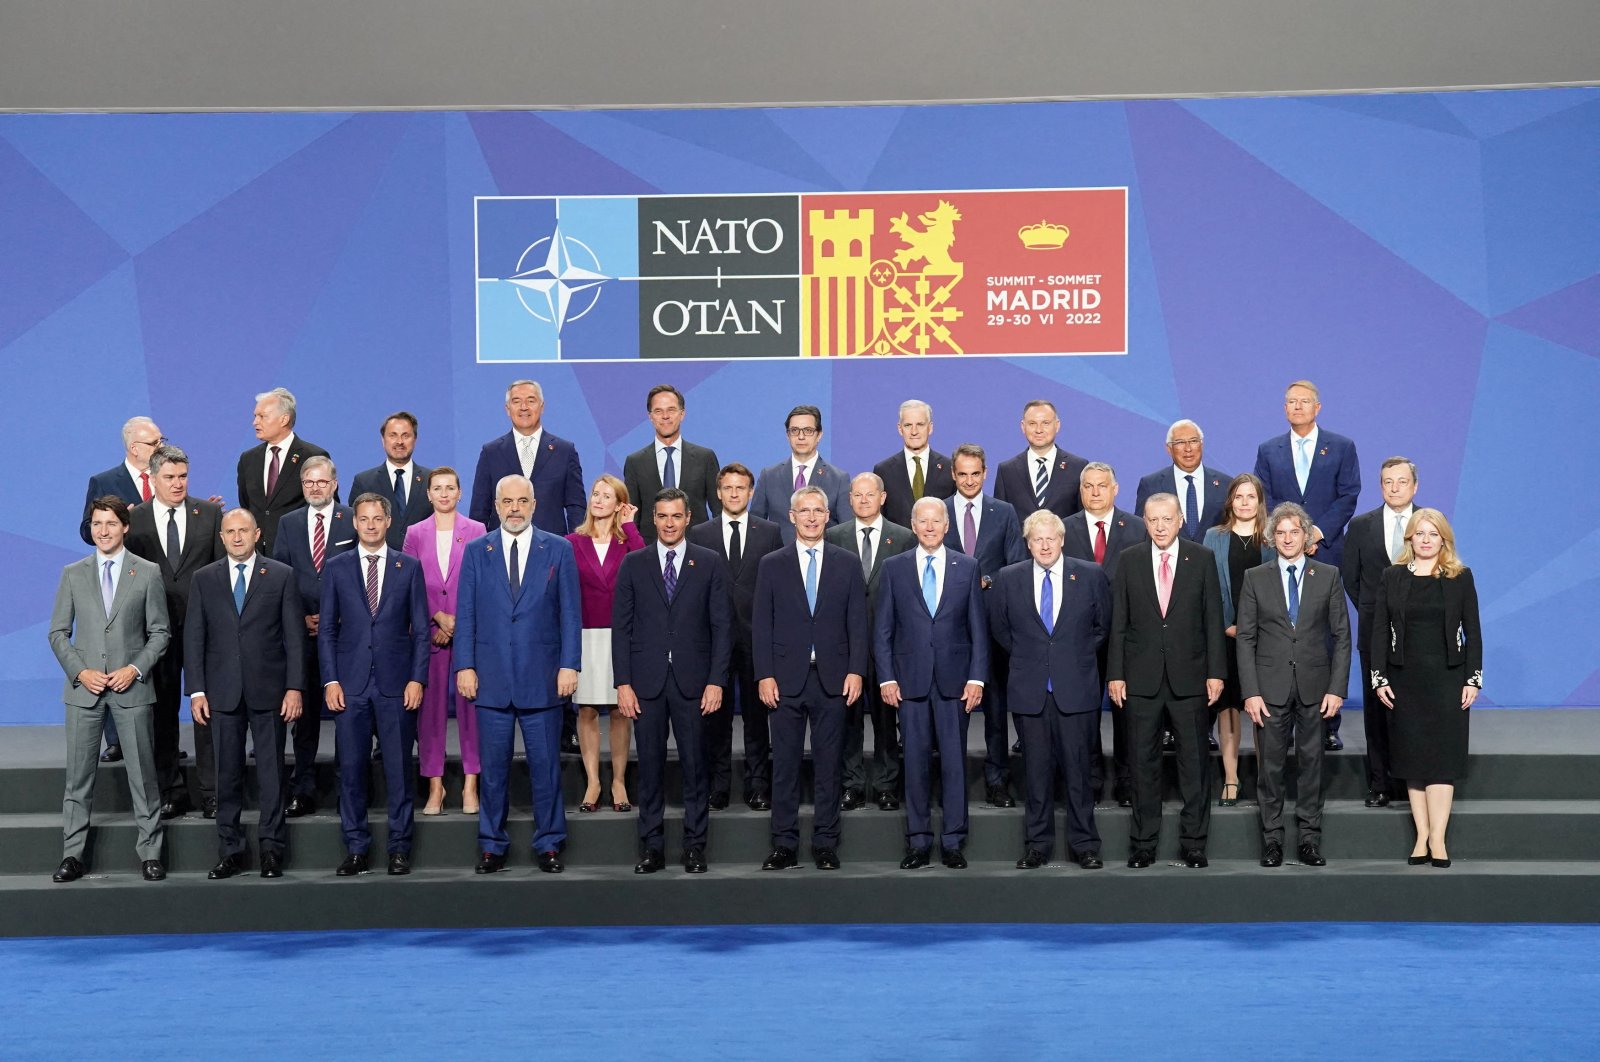 NATO leaders pose for the family photo during the NATO summit in Madrid, Spain, June 29, 2022. (Reuters Photo)